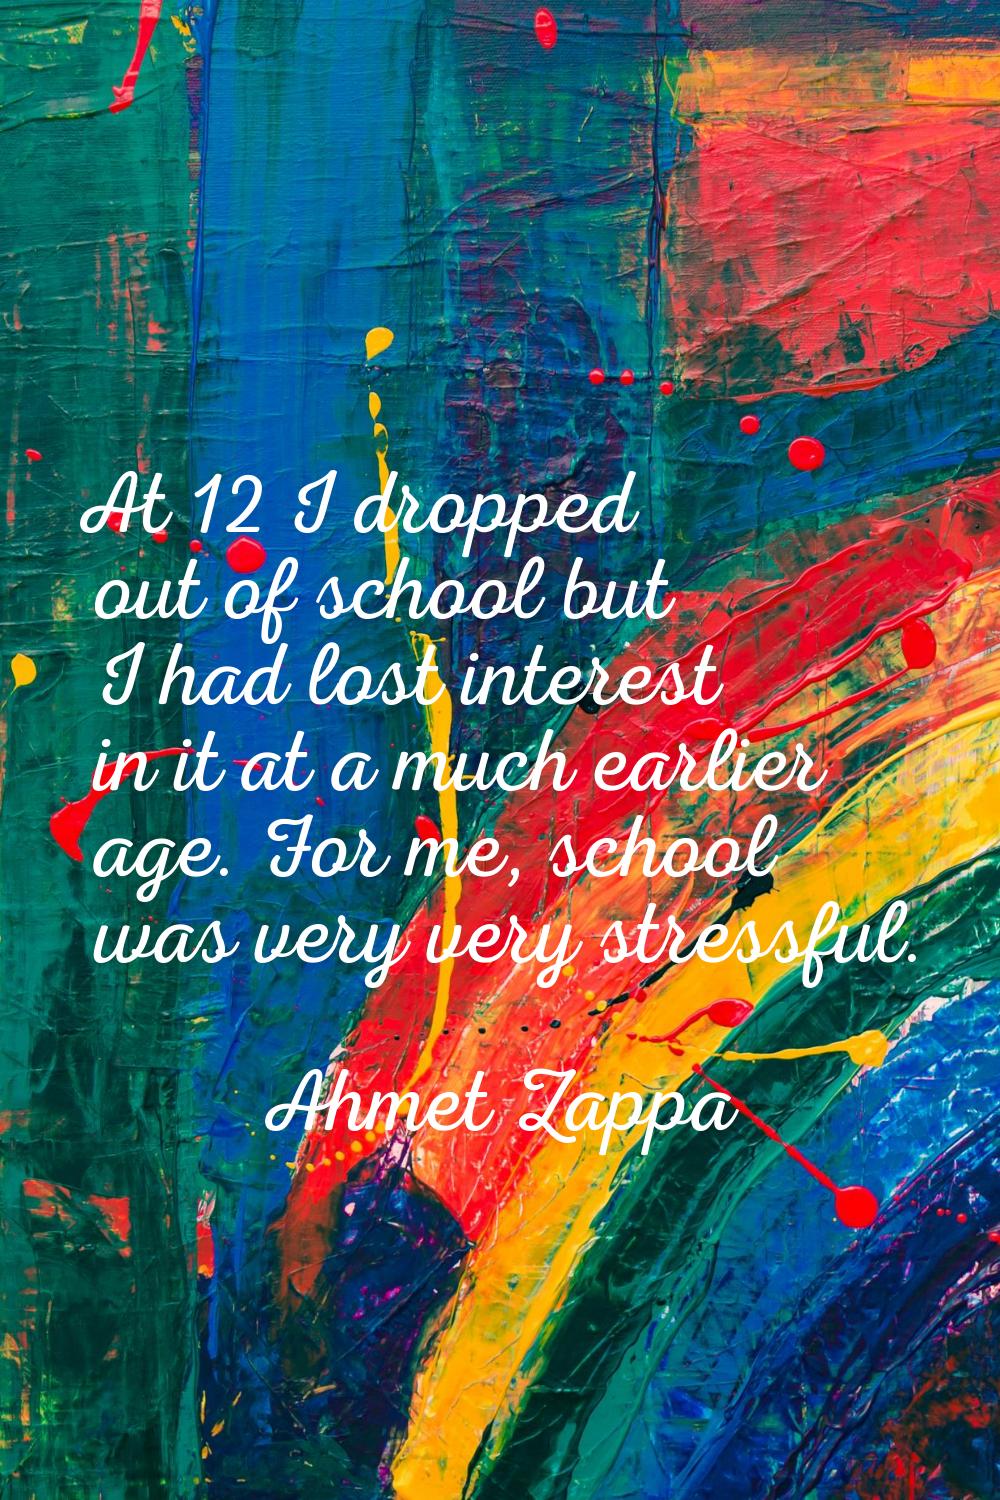 At 12 I dropped out of school but I had lost interest in it at a much earlier age. For me, school w